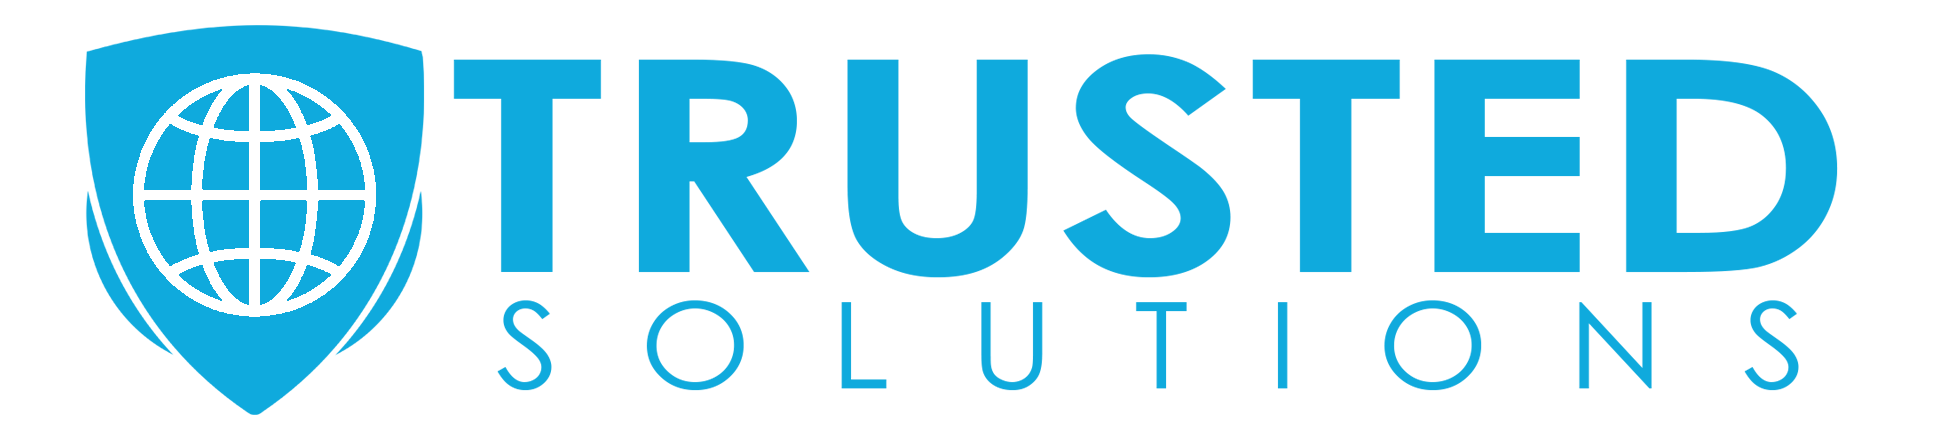 Blue Trusted Solutions Logo